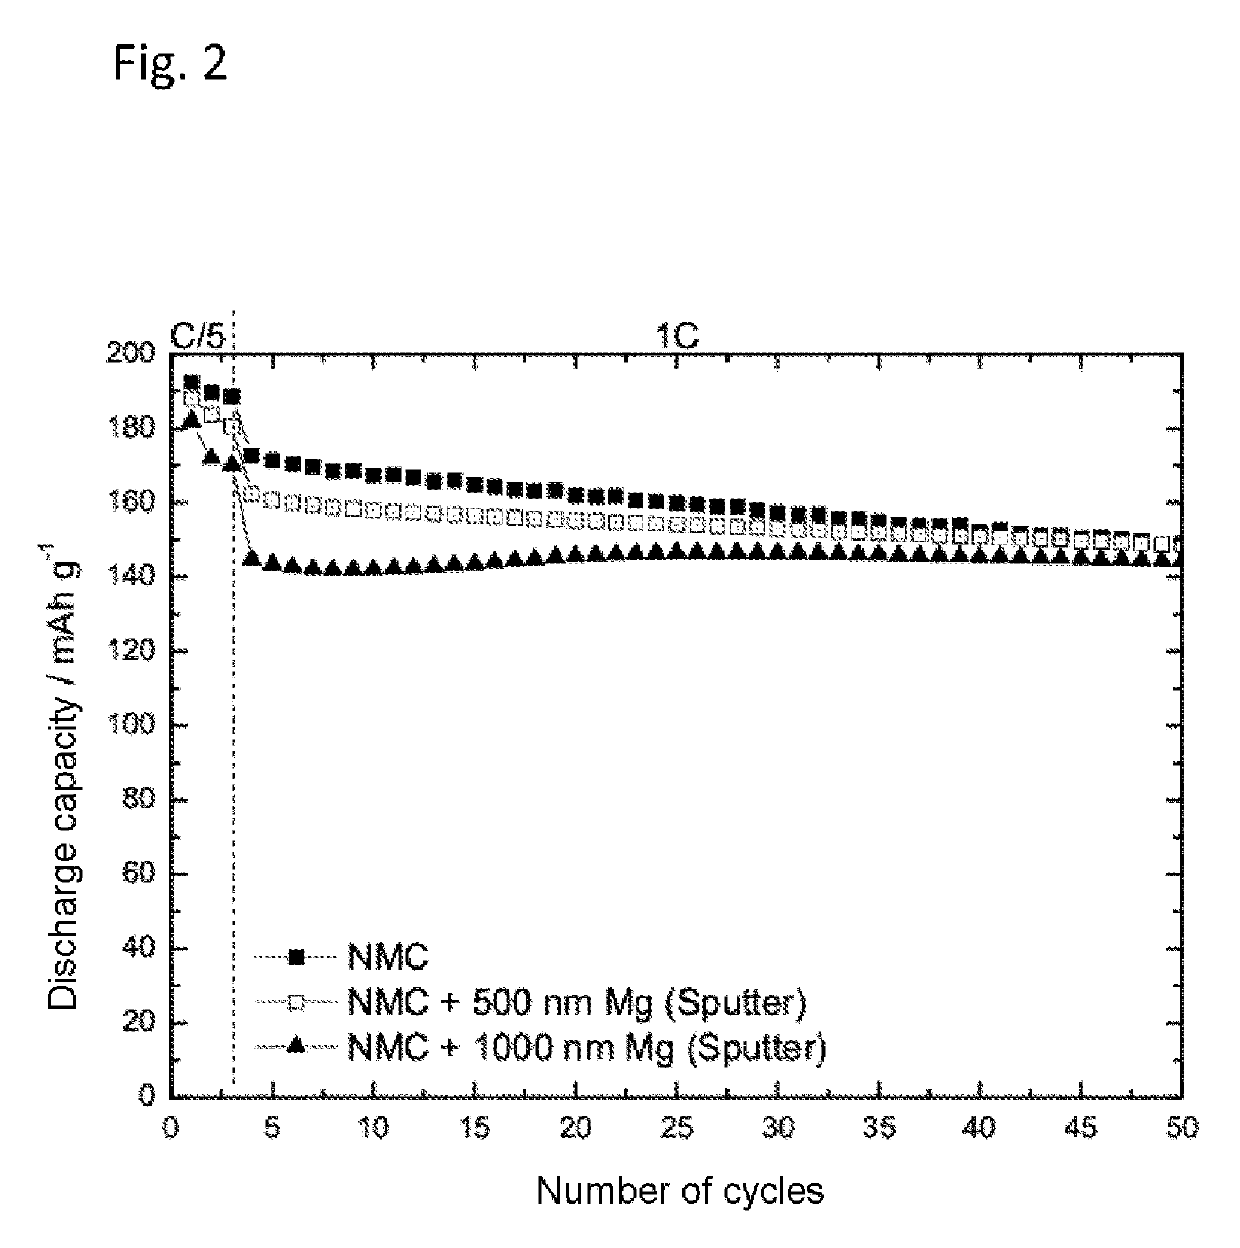 Electrolyte additive and metal included in composite electrode containing Mg, Al, Cu, and Cr for alkali metal storage system